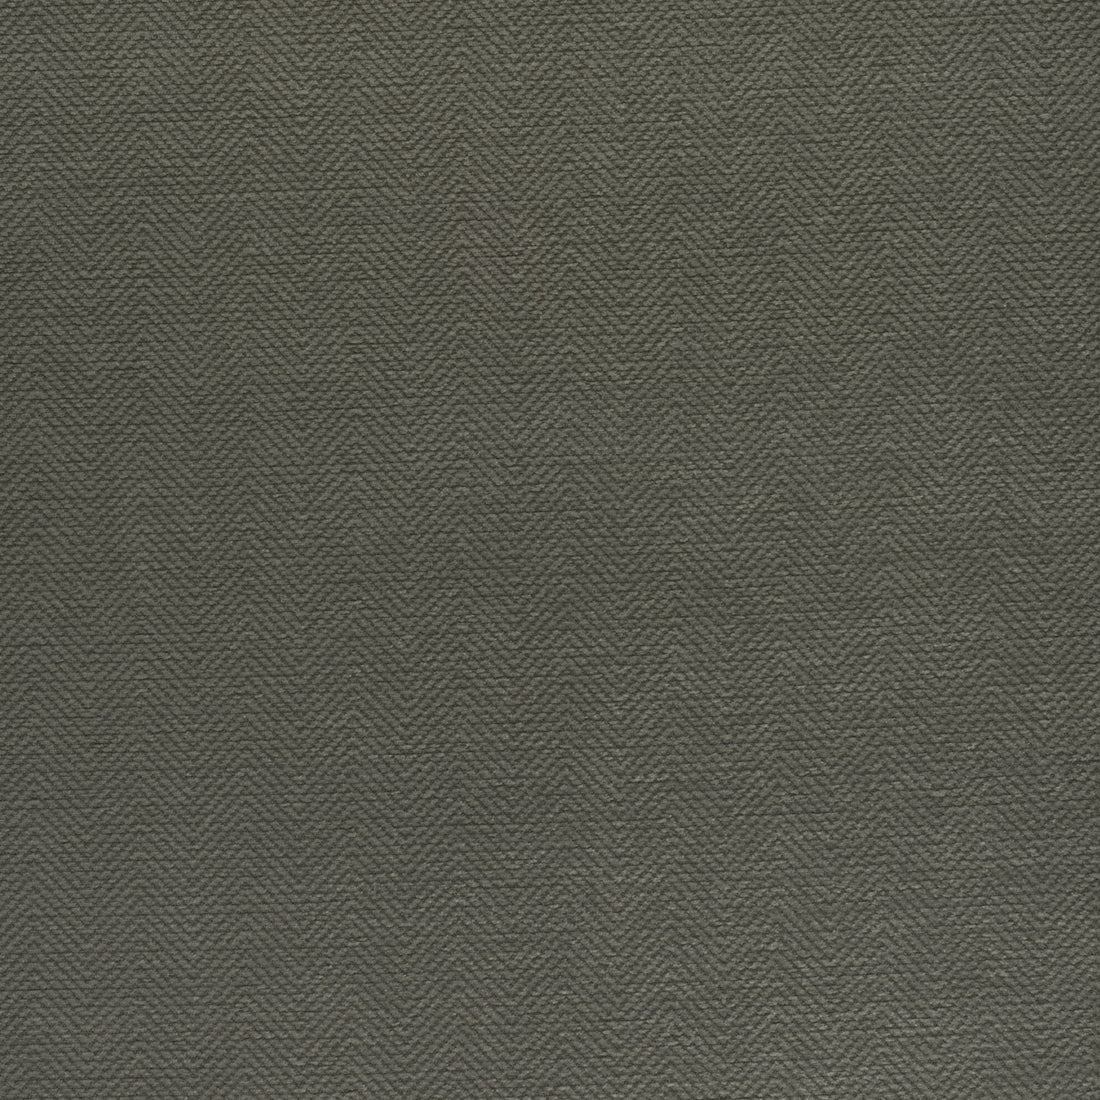 Bronwyn Herringbone fabric in charcoal color - pattern number W80685 - by Thibaut in the Pinnacle collection